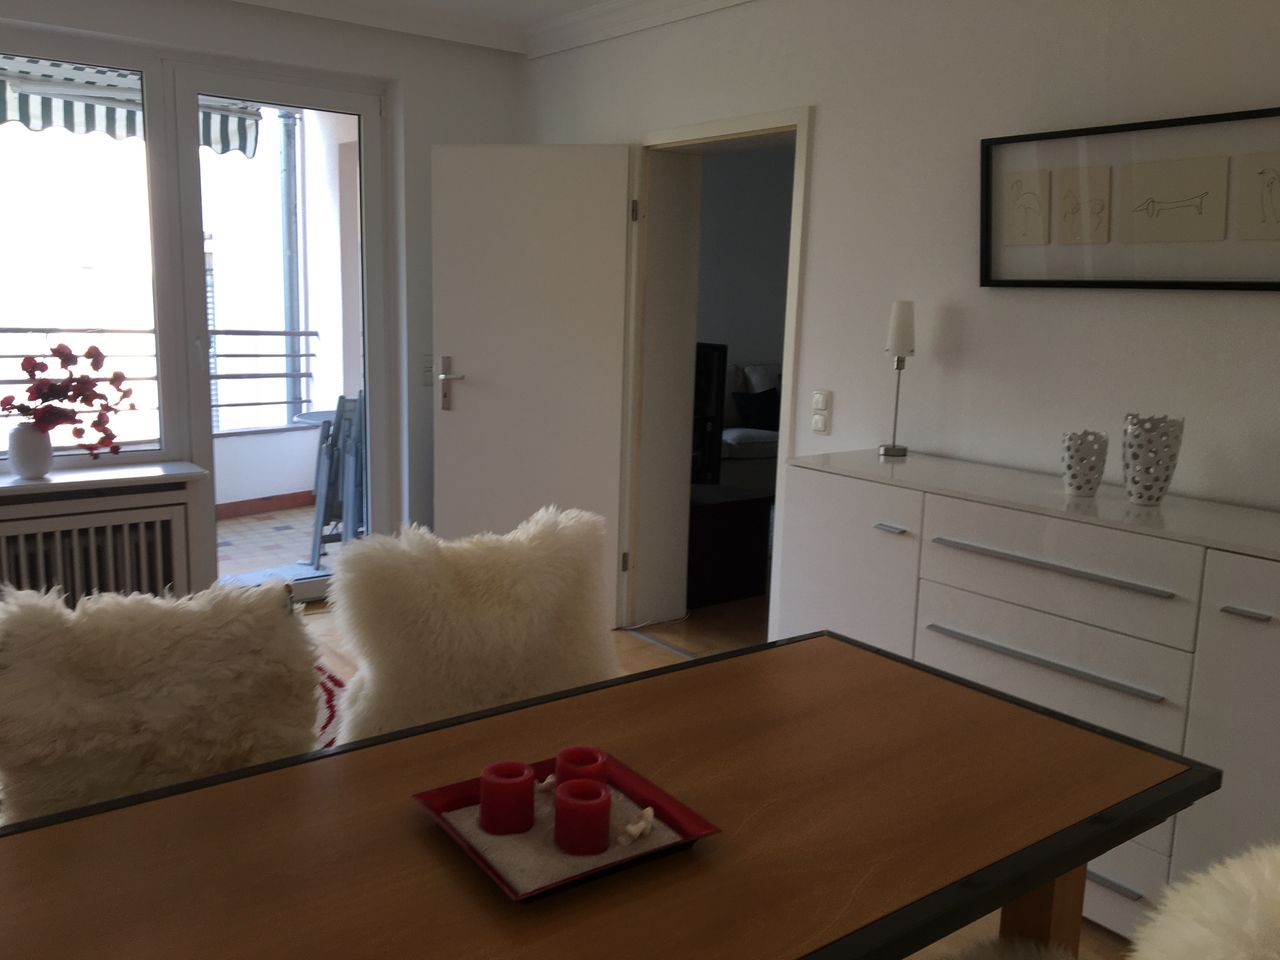 3 room apartment in Westend-North in the centre of Frankfurt.